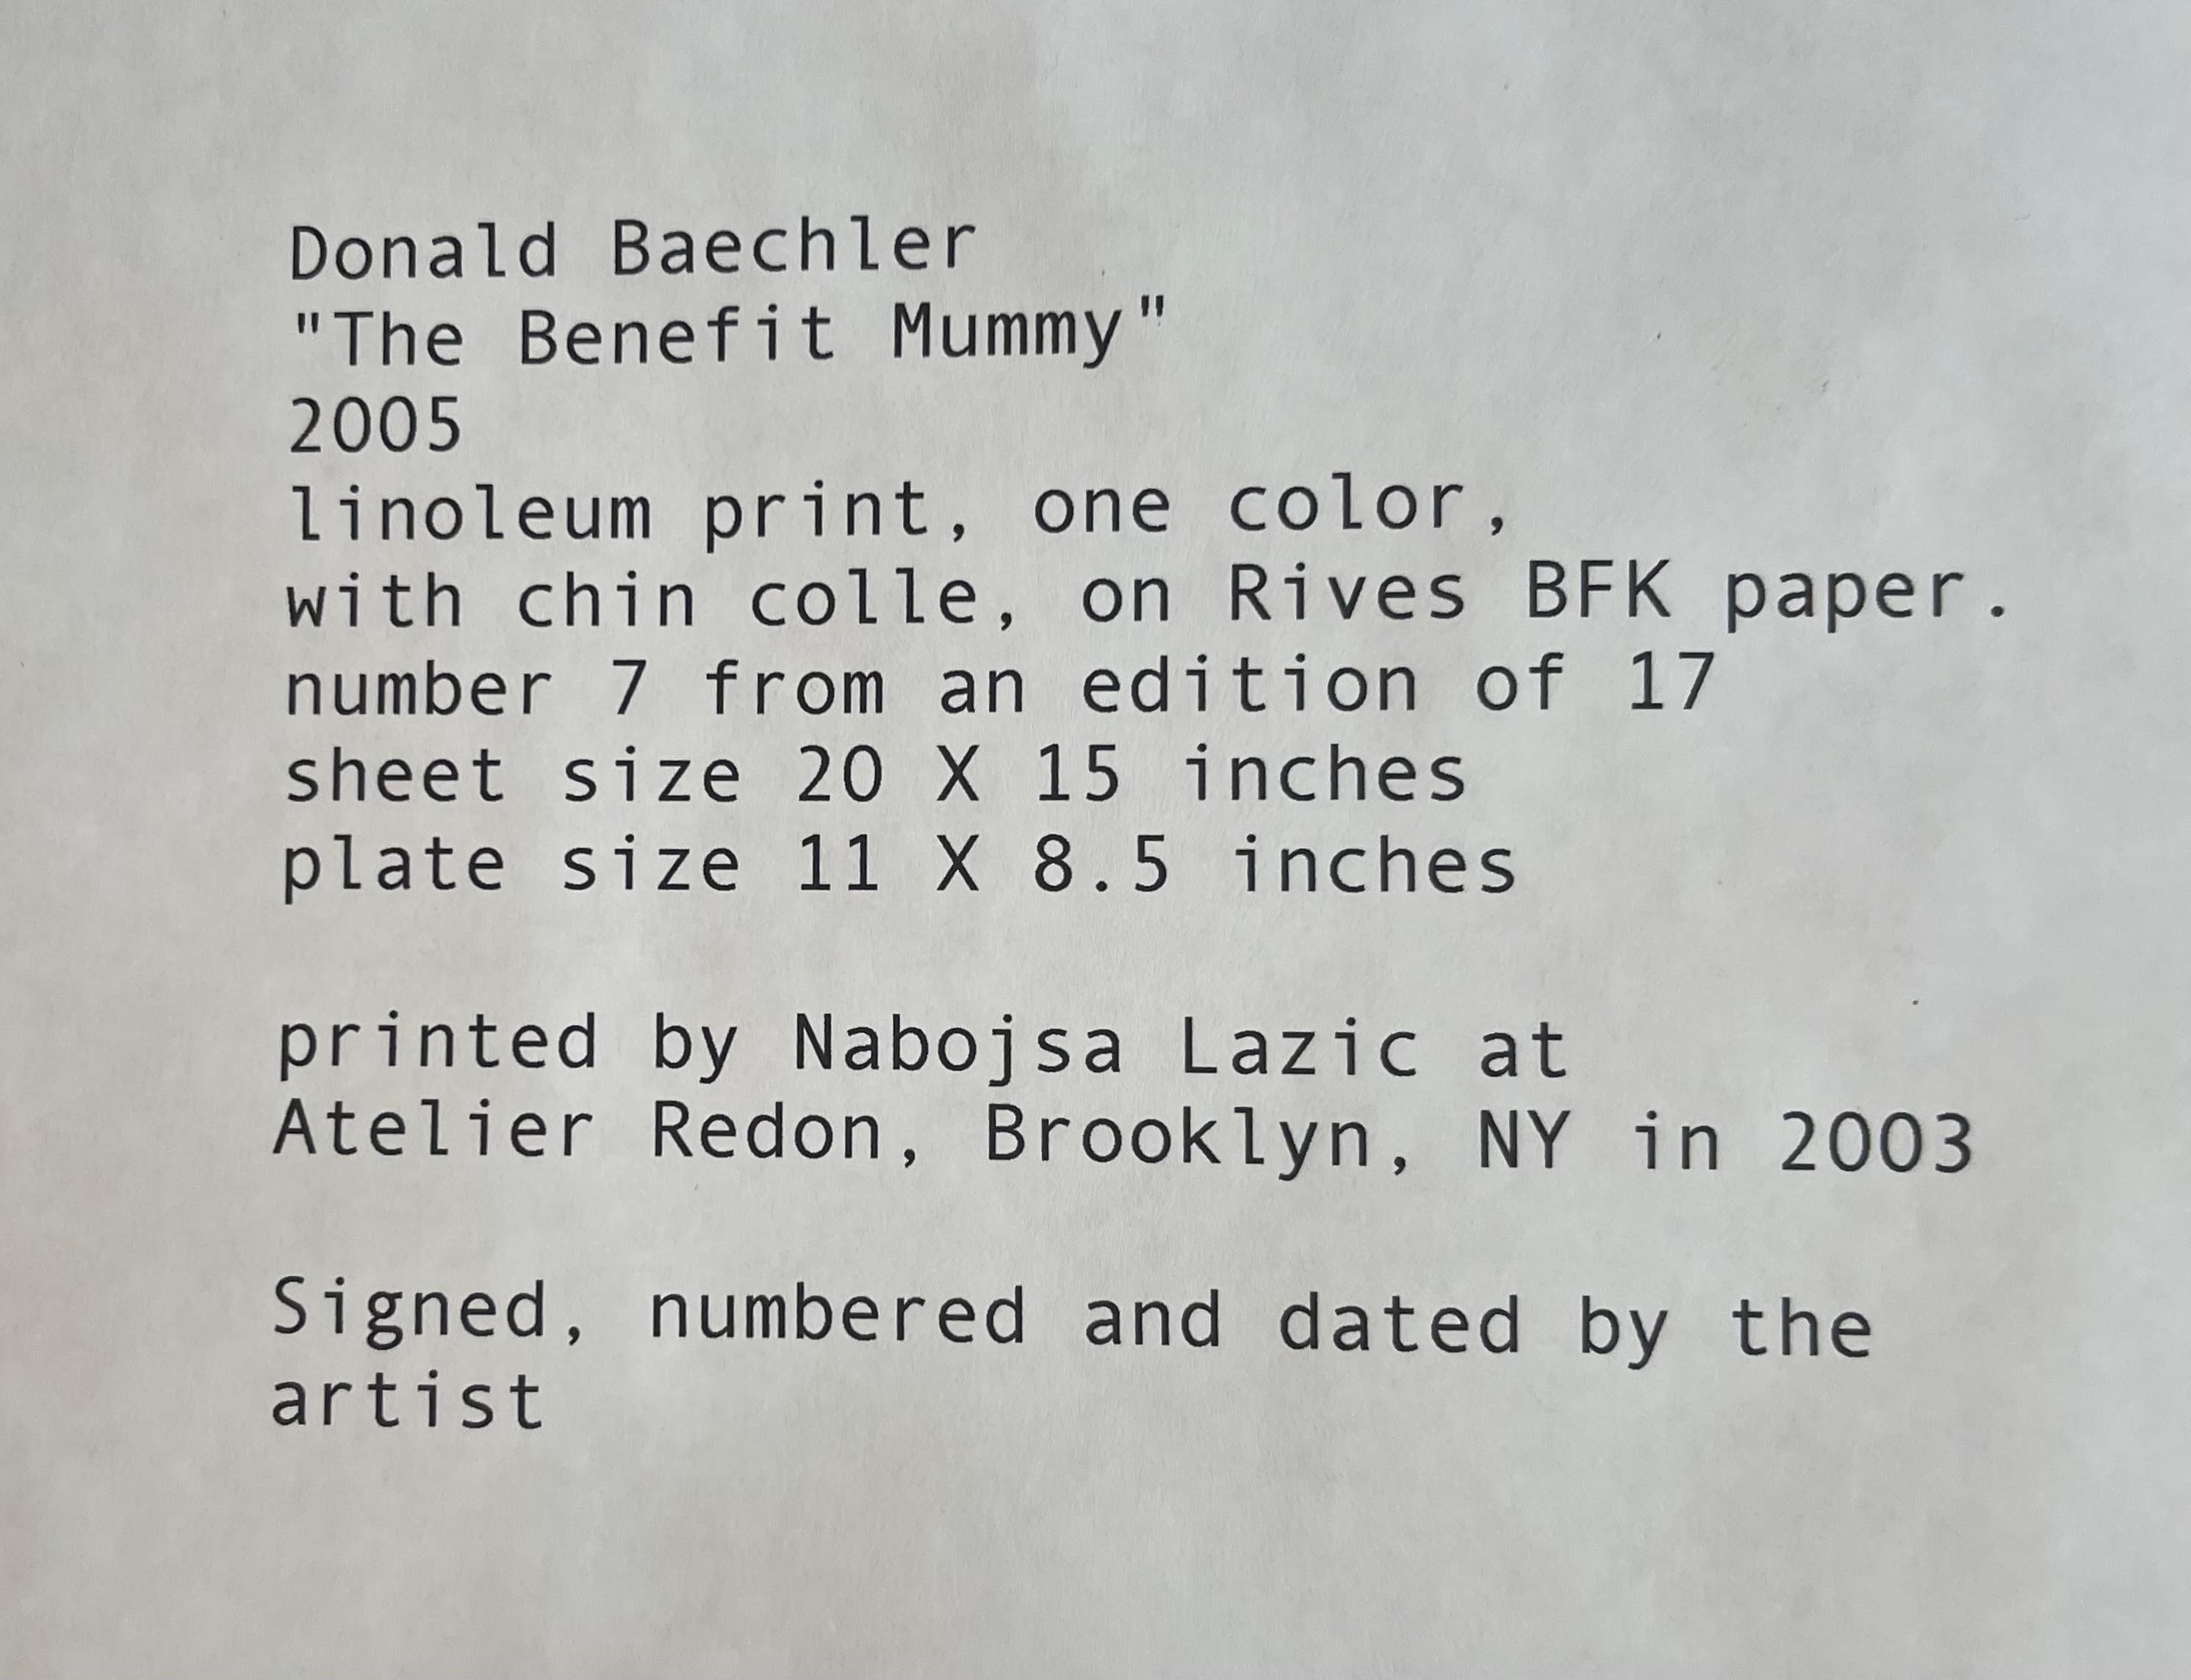 Donald Baechler
The Benefit Mummy, 2005
Linoleum print, one color, with chine colle, on Rives BFK paper
Hand signed, numbered 7/17 and dated by the artist on the front; bears a documentation sheet from the artist's studio on the back
Frame included: